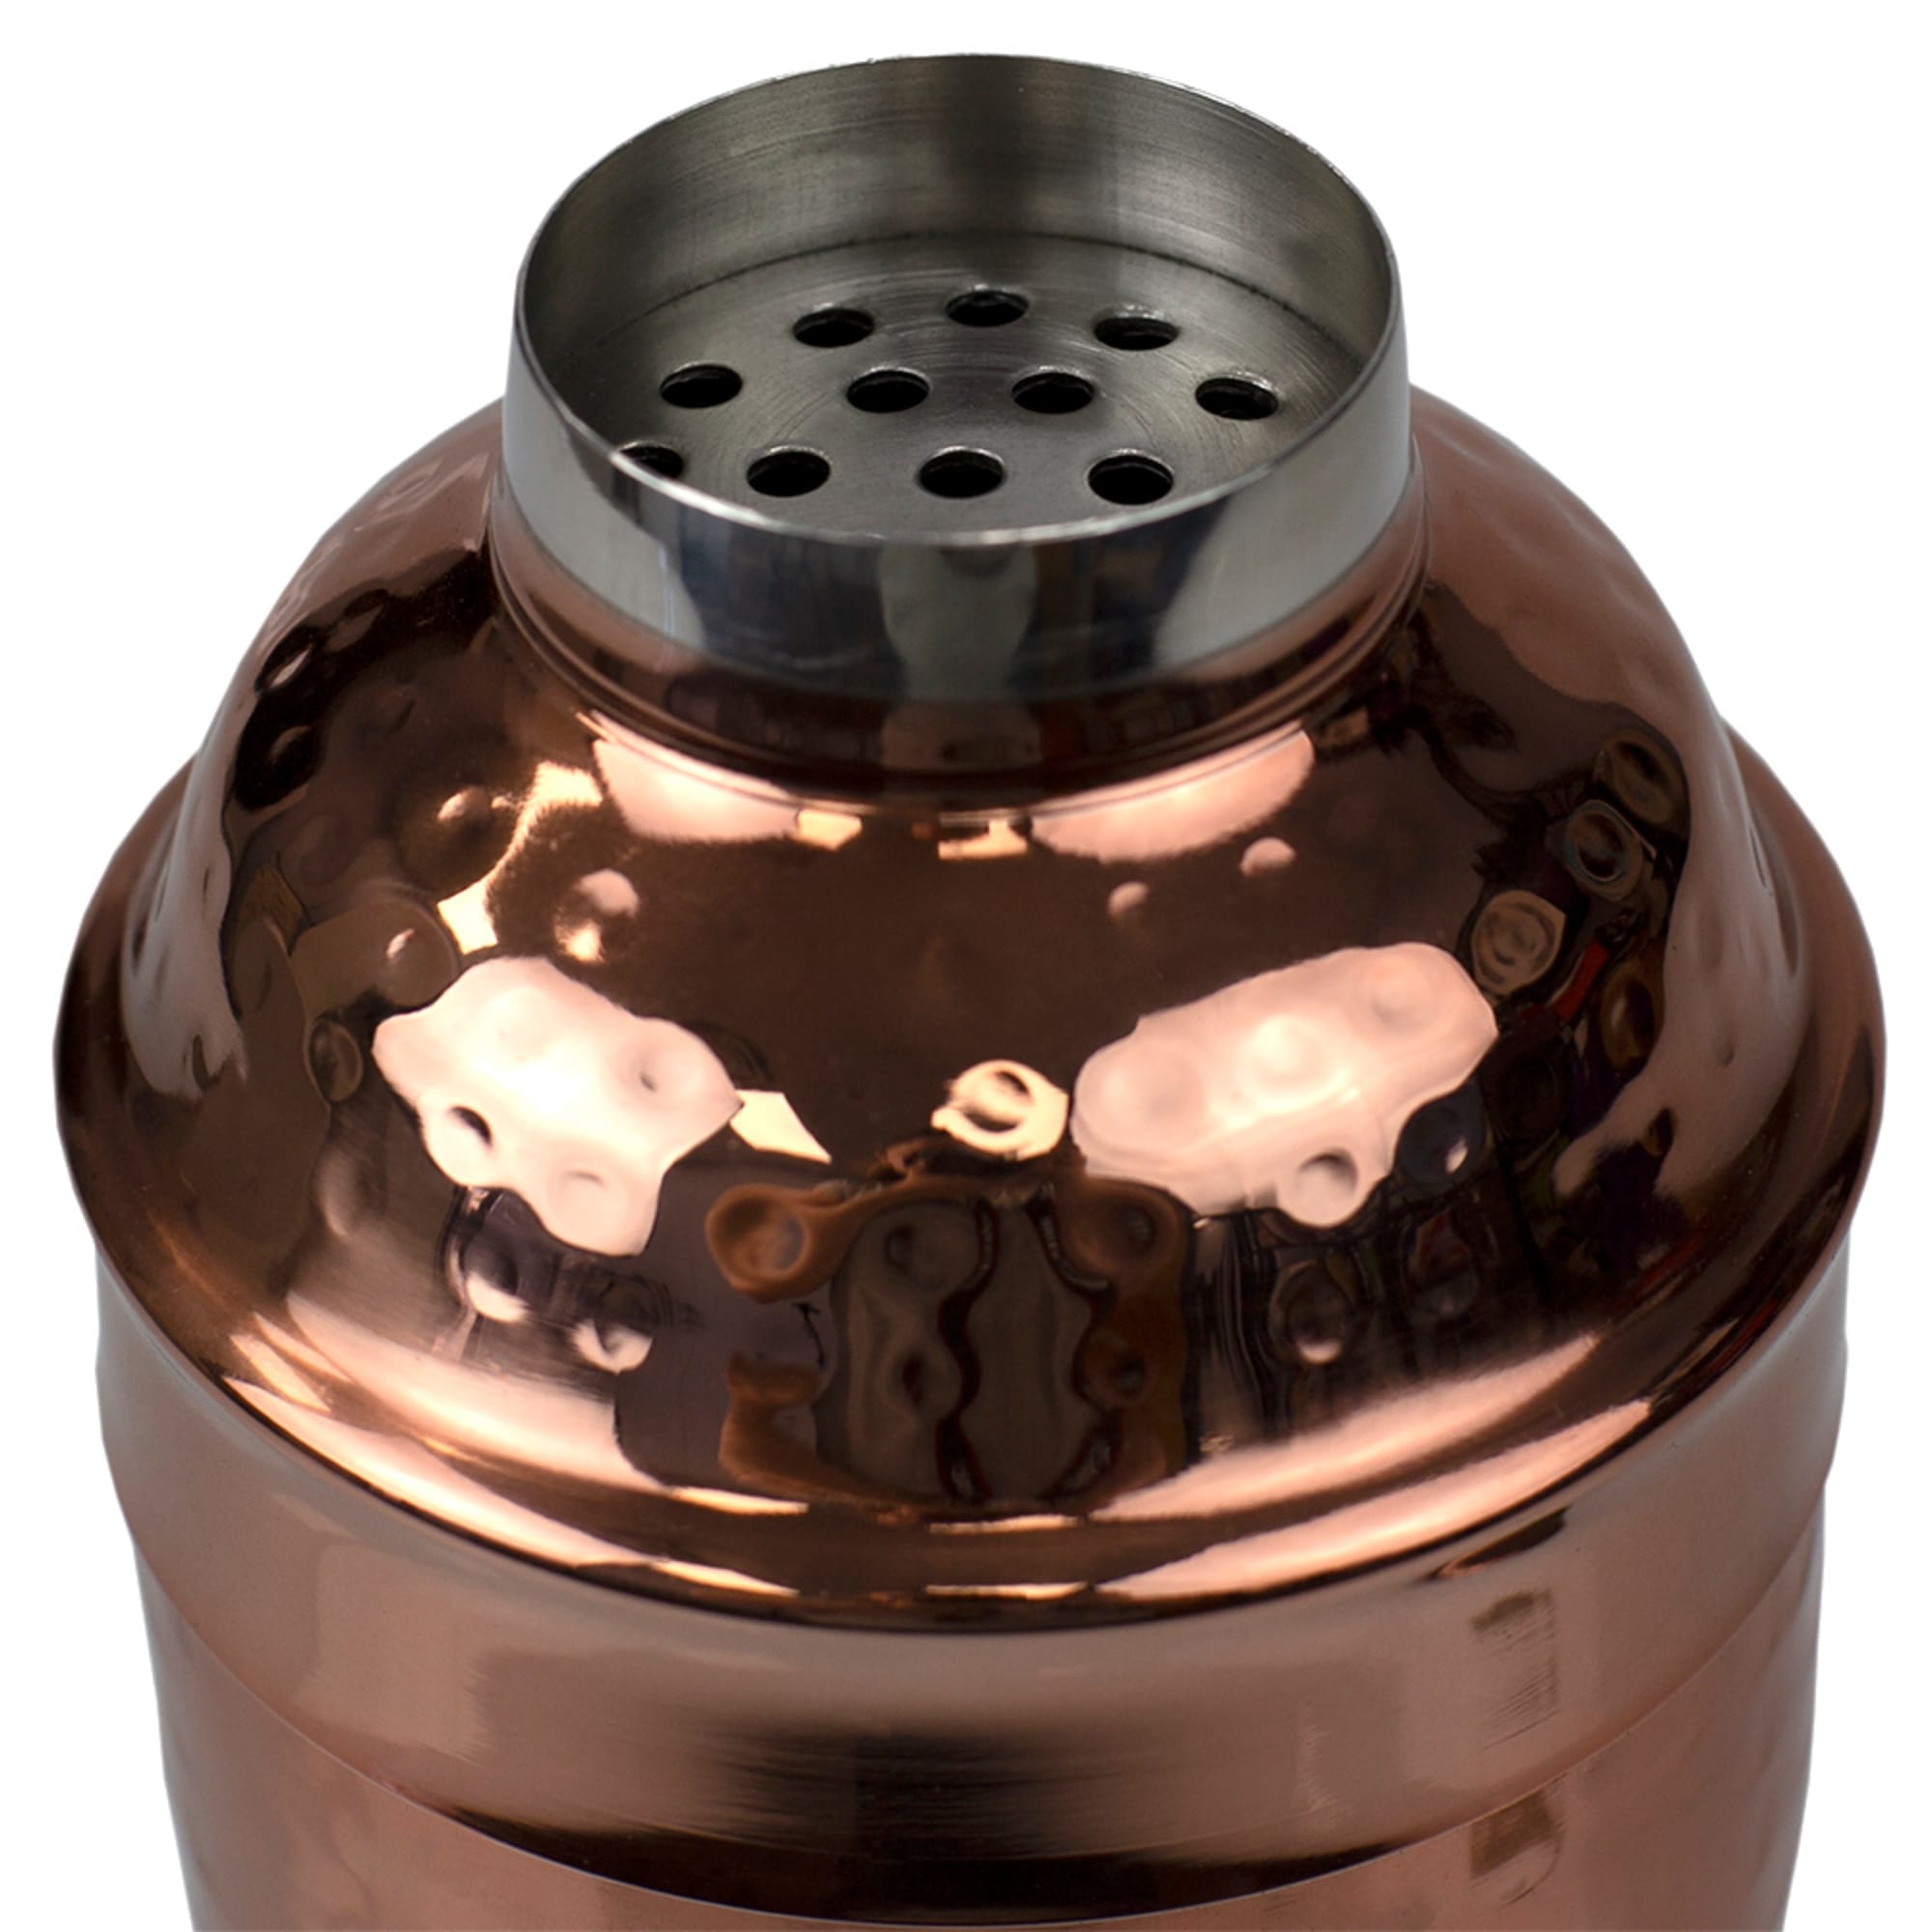 Home Basics 750 ml Hammered Steel Cocktail Shaker, Copper $6 EACH, CASE PACK OF 12